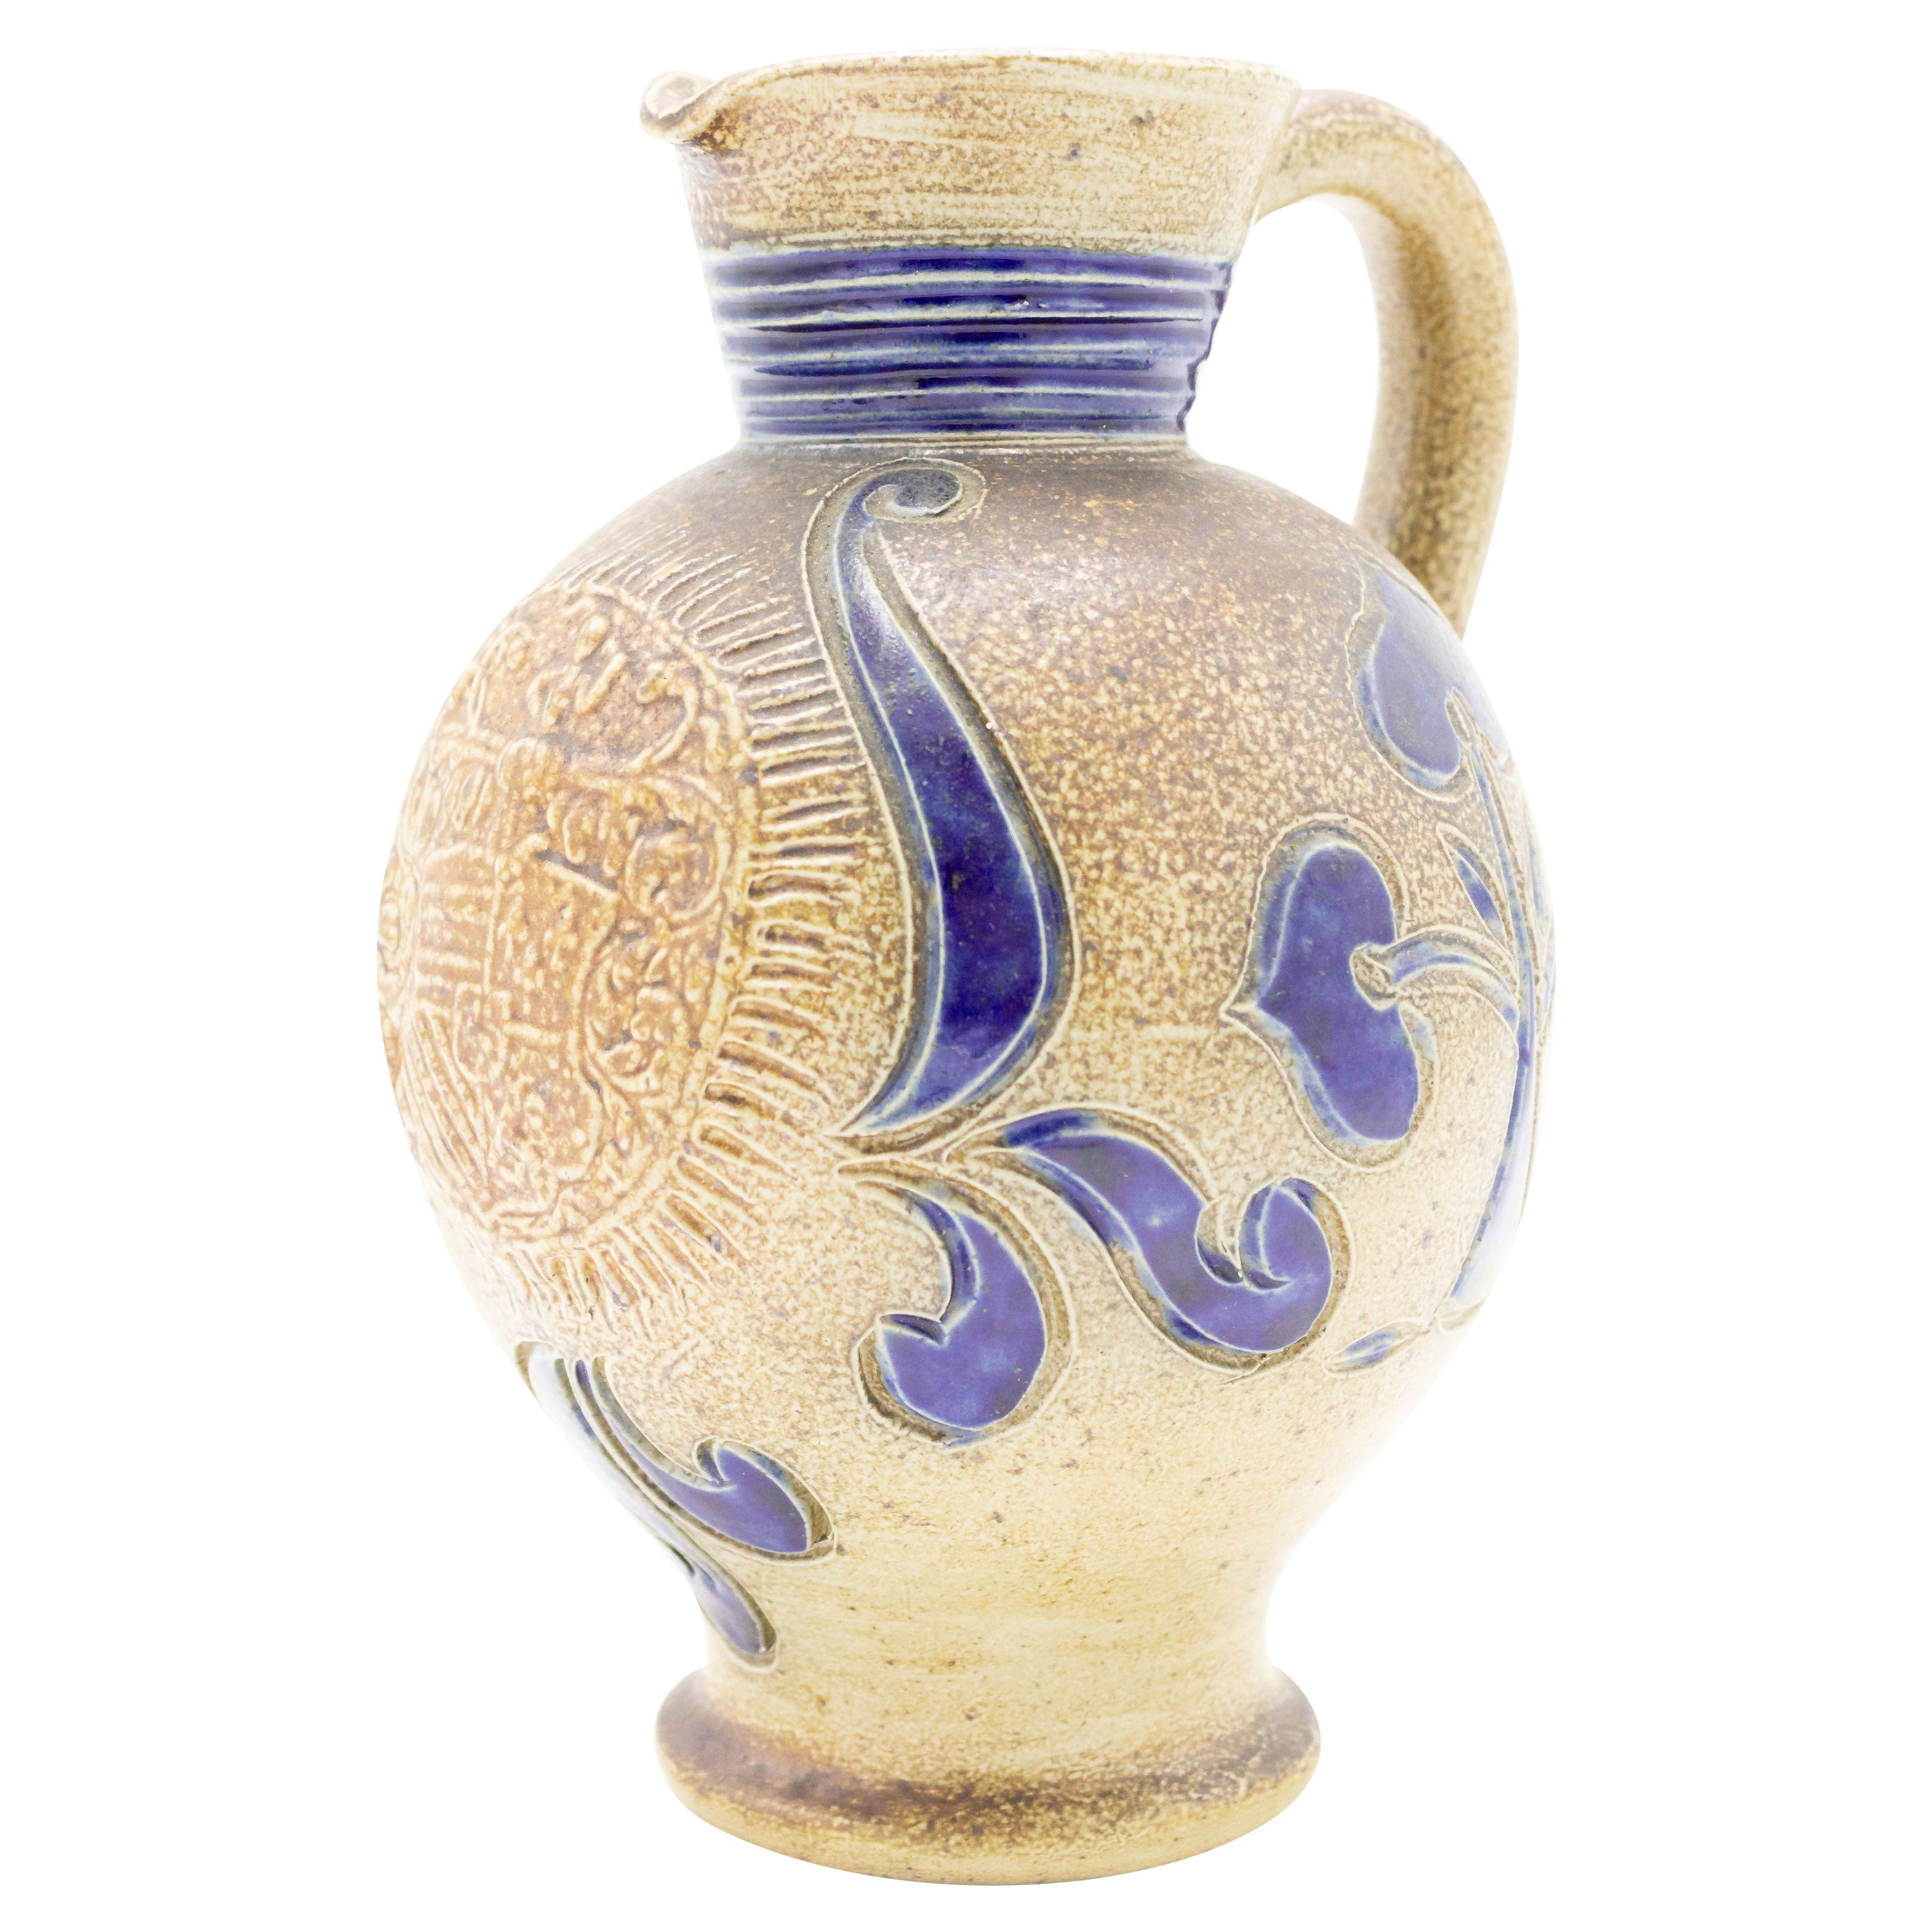 German Stoneware Pitcher with Incised Blue Decorations